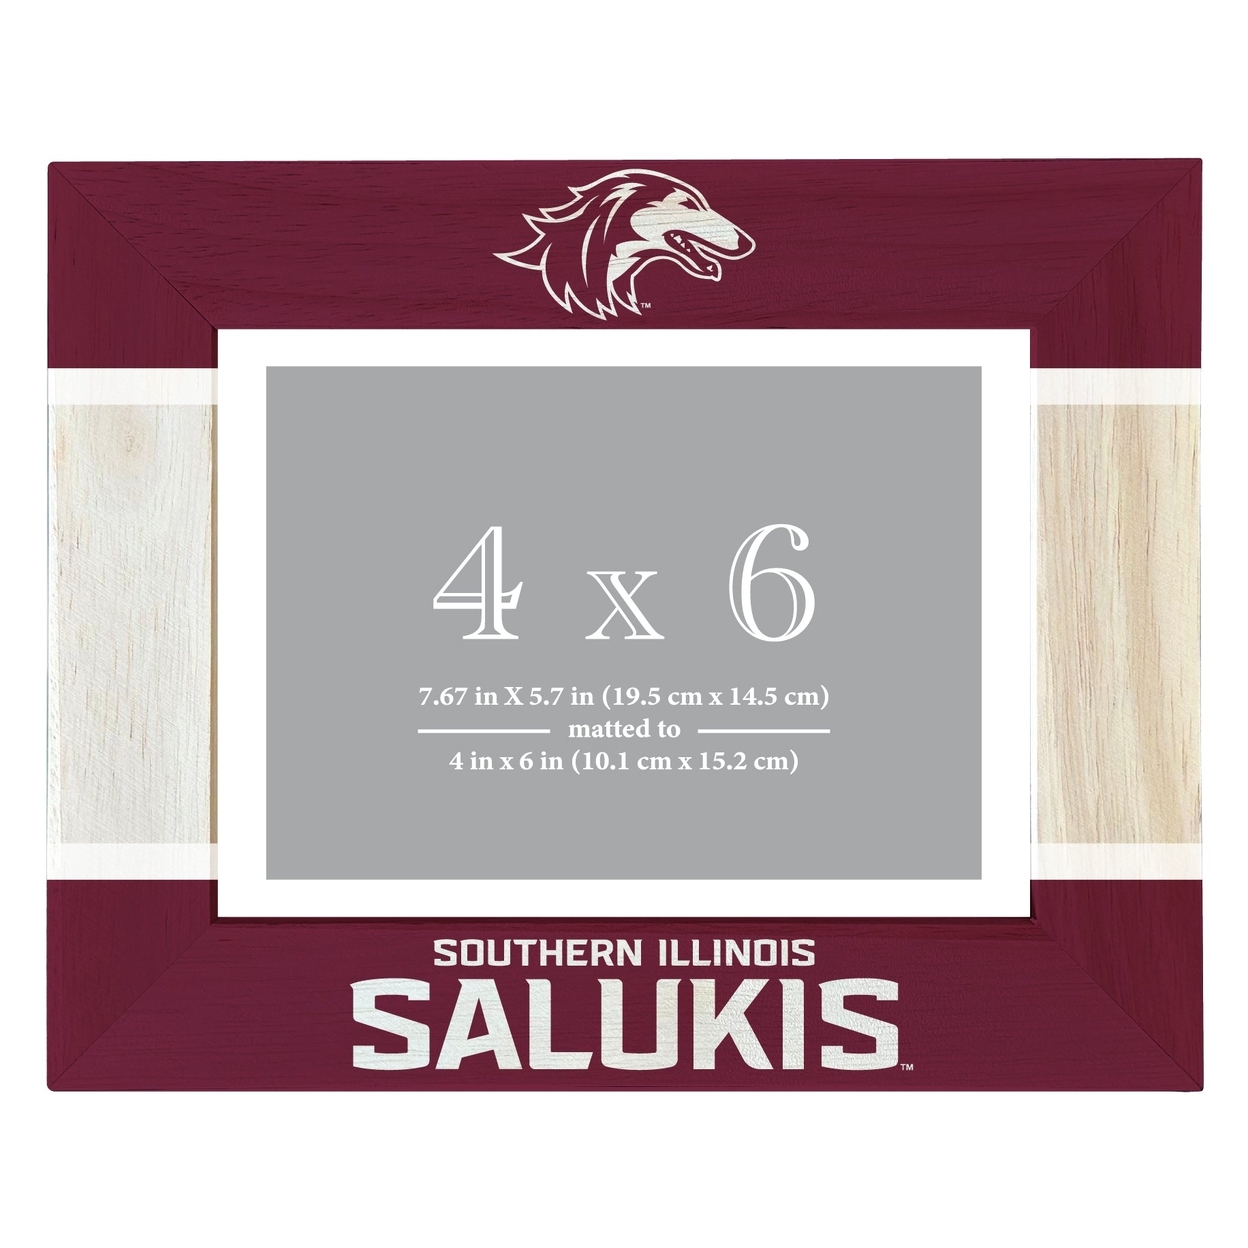 Southern Illinois Salukis Wooden Photo Frame Matted To 4 X 6 Inch - Printed